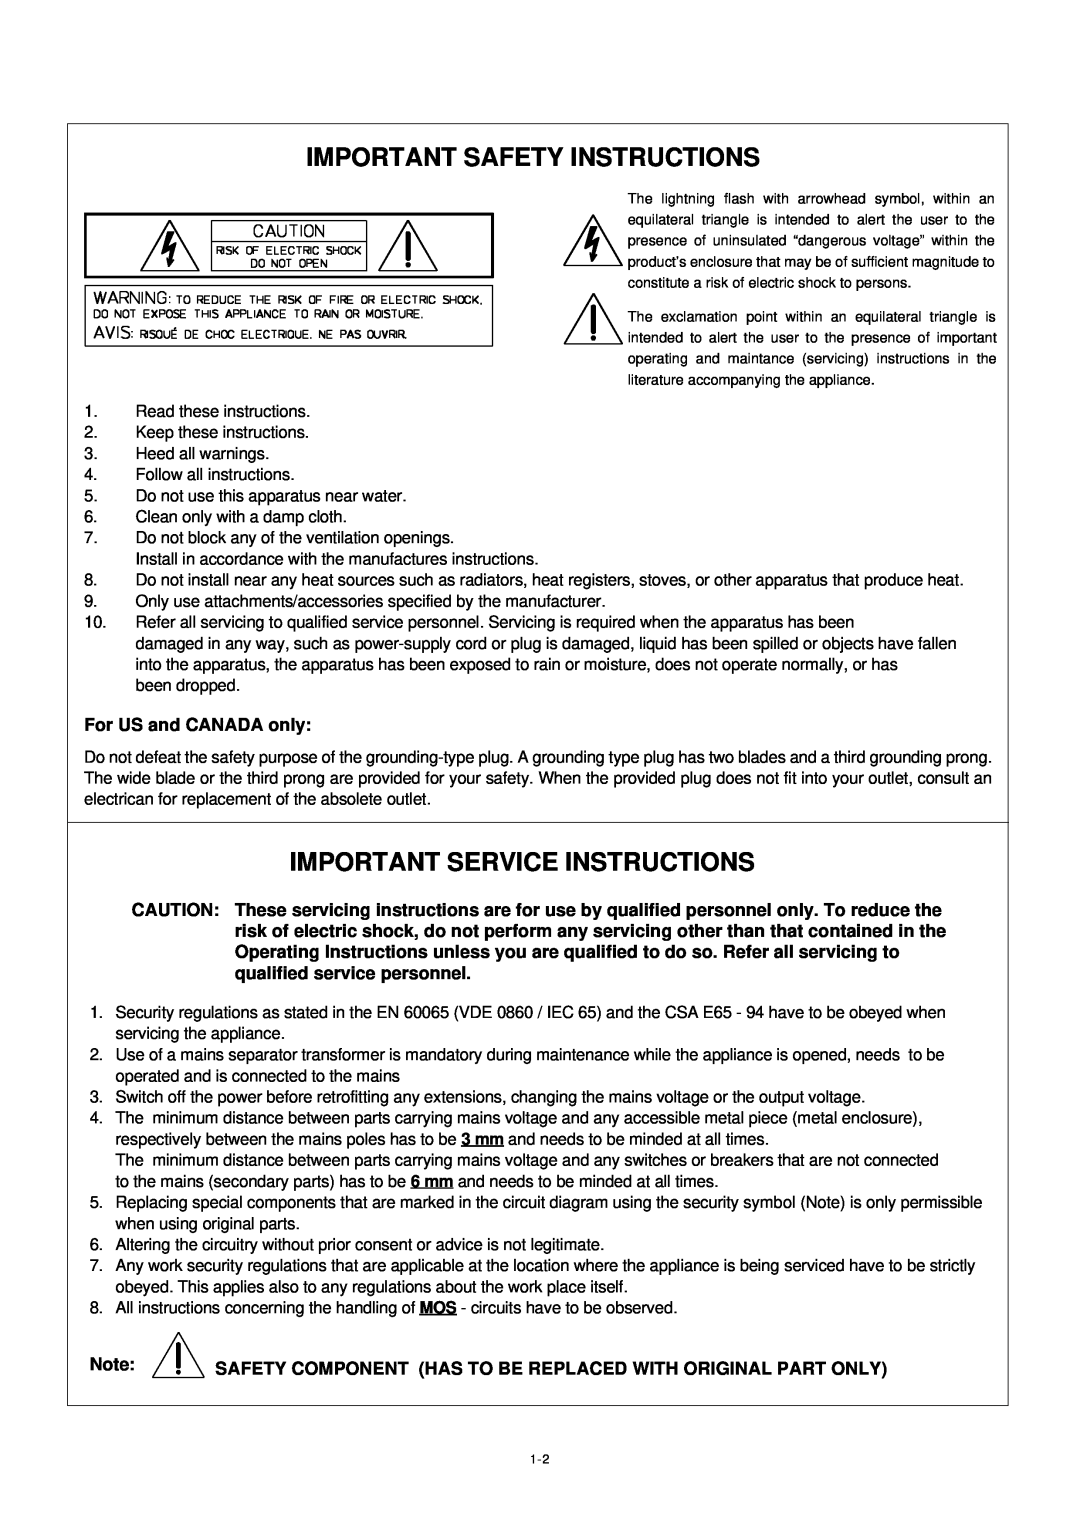 Dynacord DSP 244 owner manual For US and CANADA only, Important Safety Instructions, Important Service Instructions 